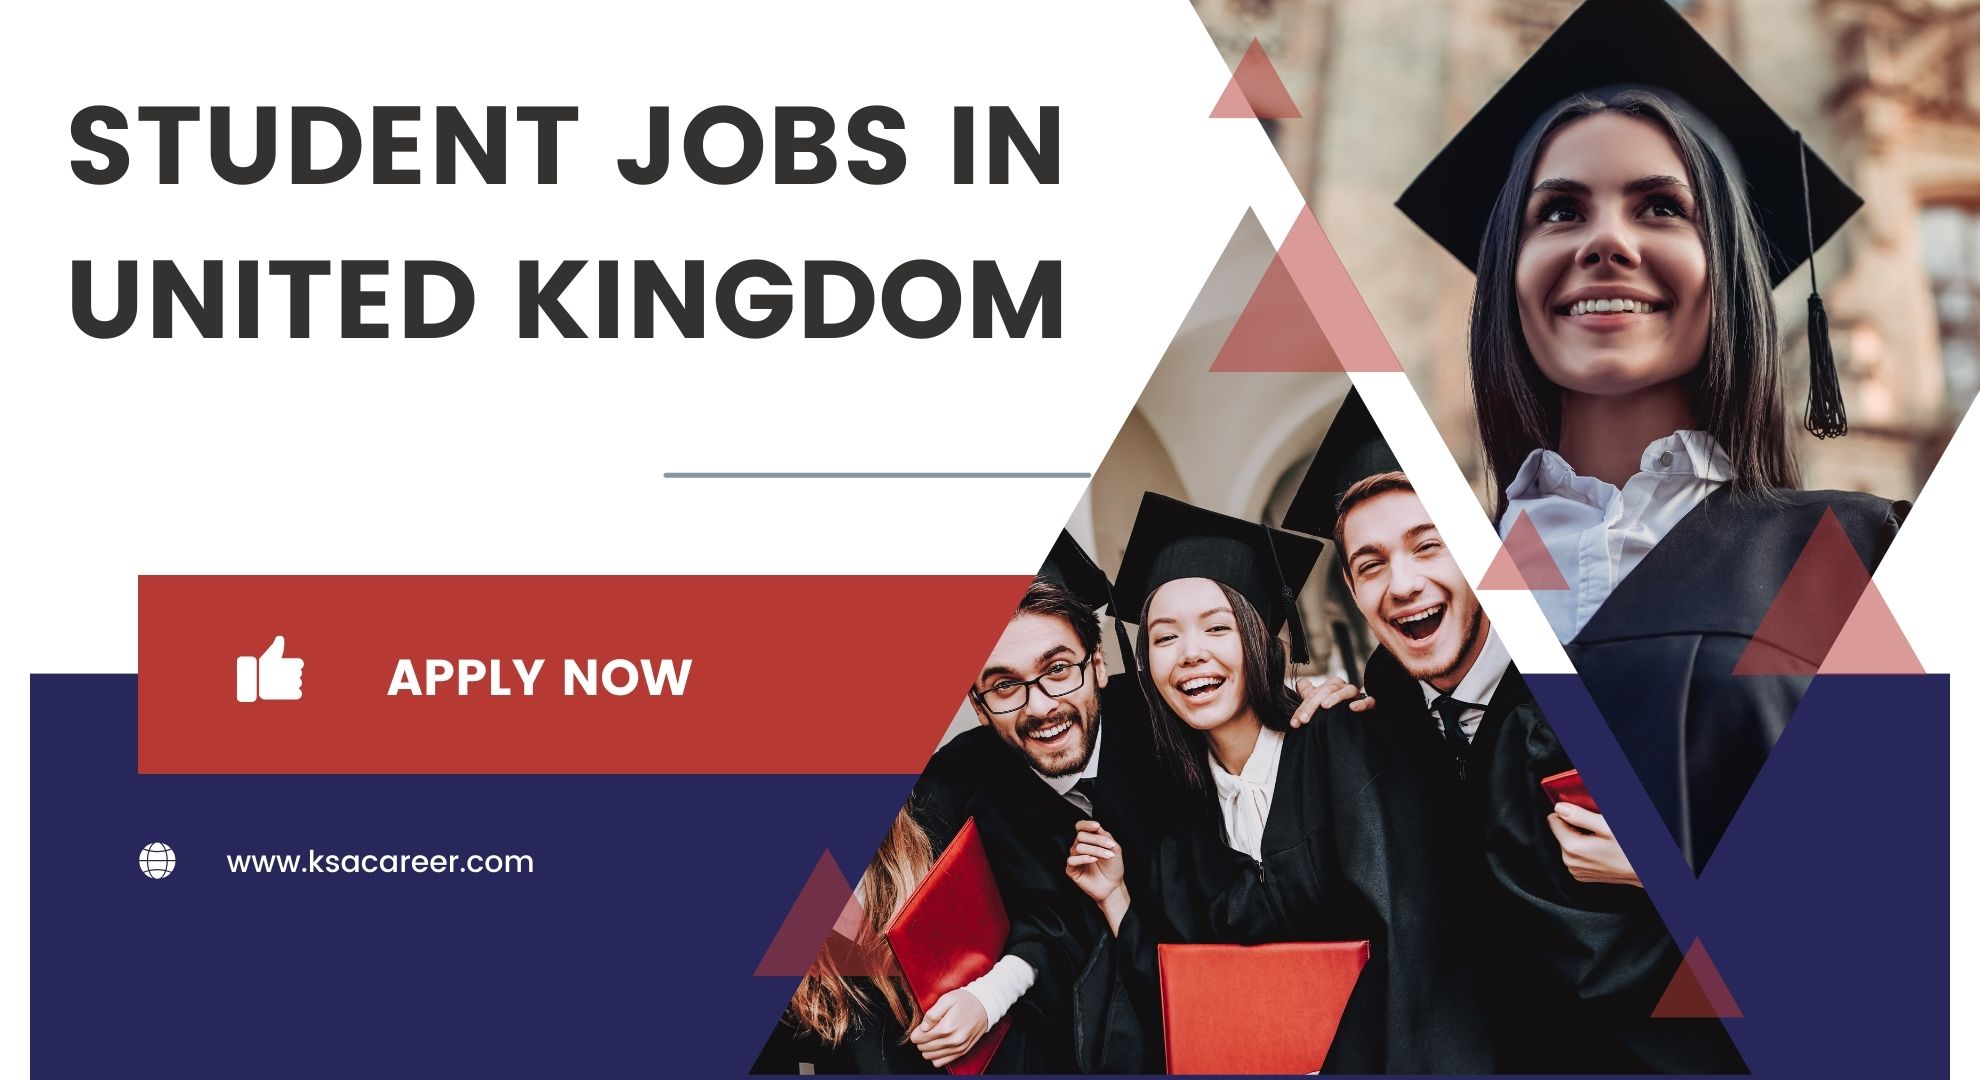 Student Jobs in the United Kingdom